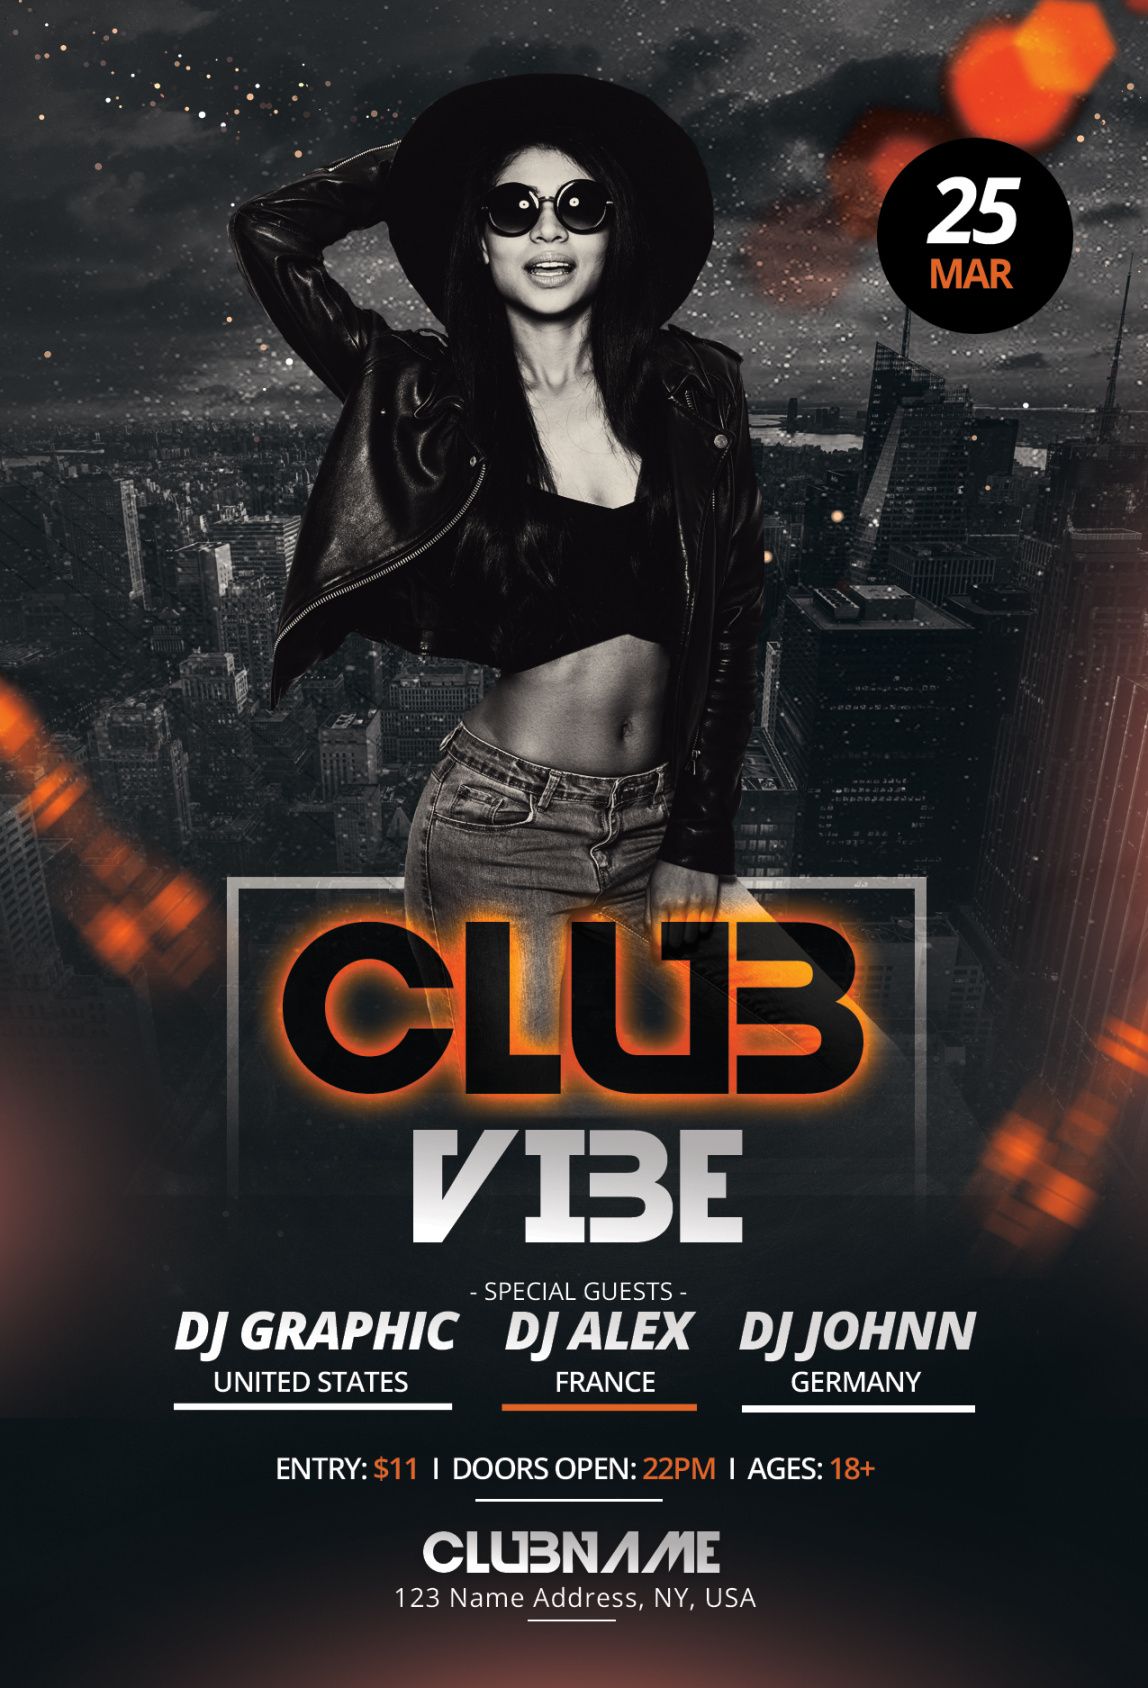 club vibe  free photoshop psd flyer template  psdflyer club promo flyer template and sample